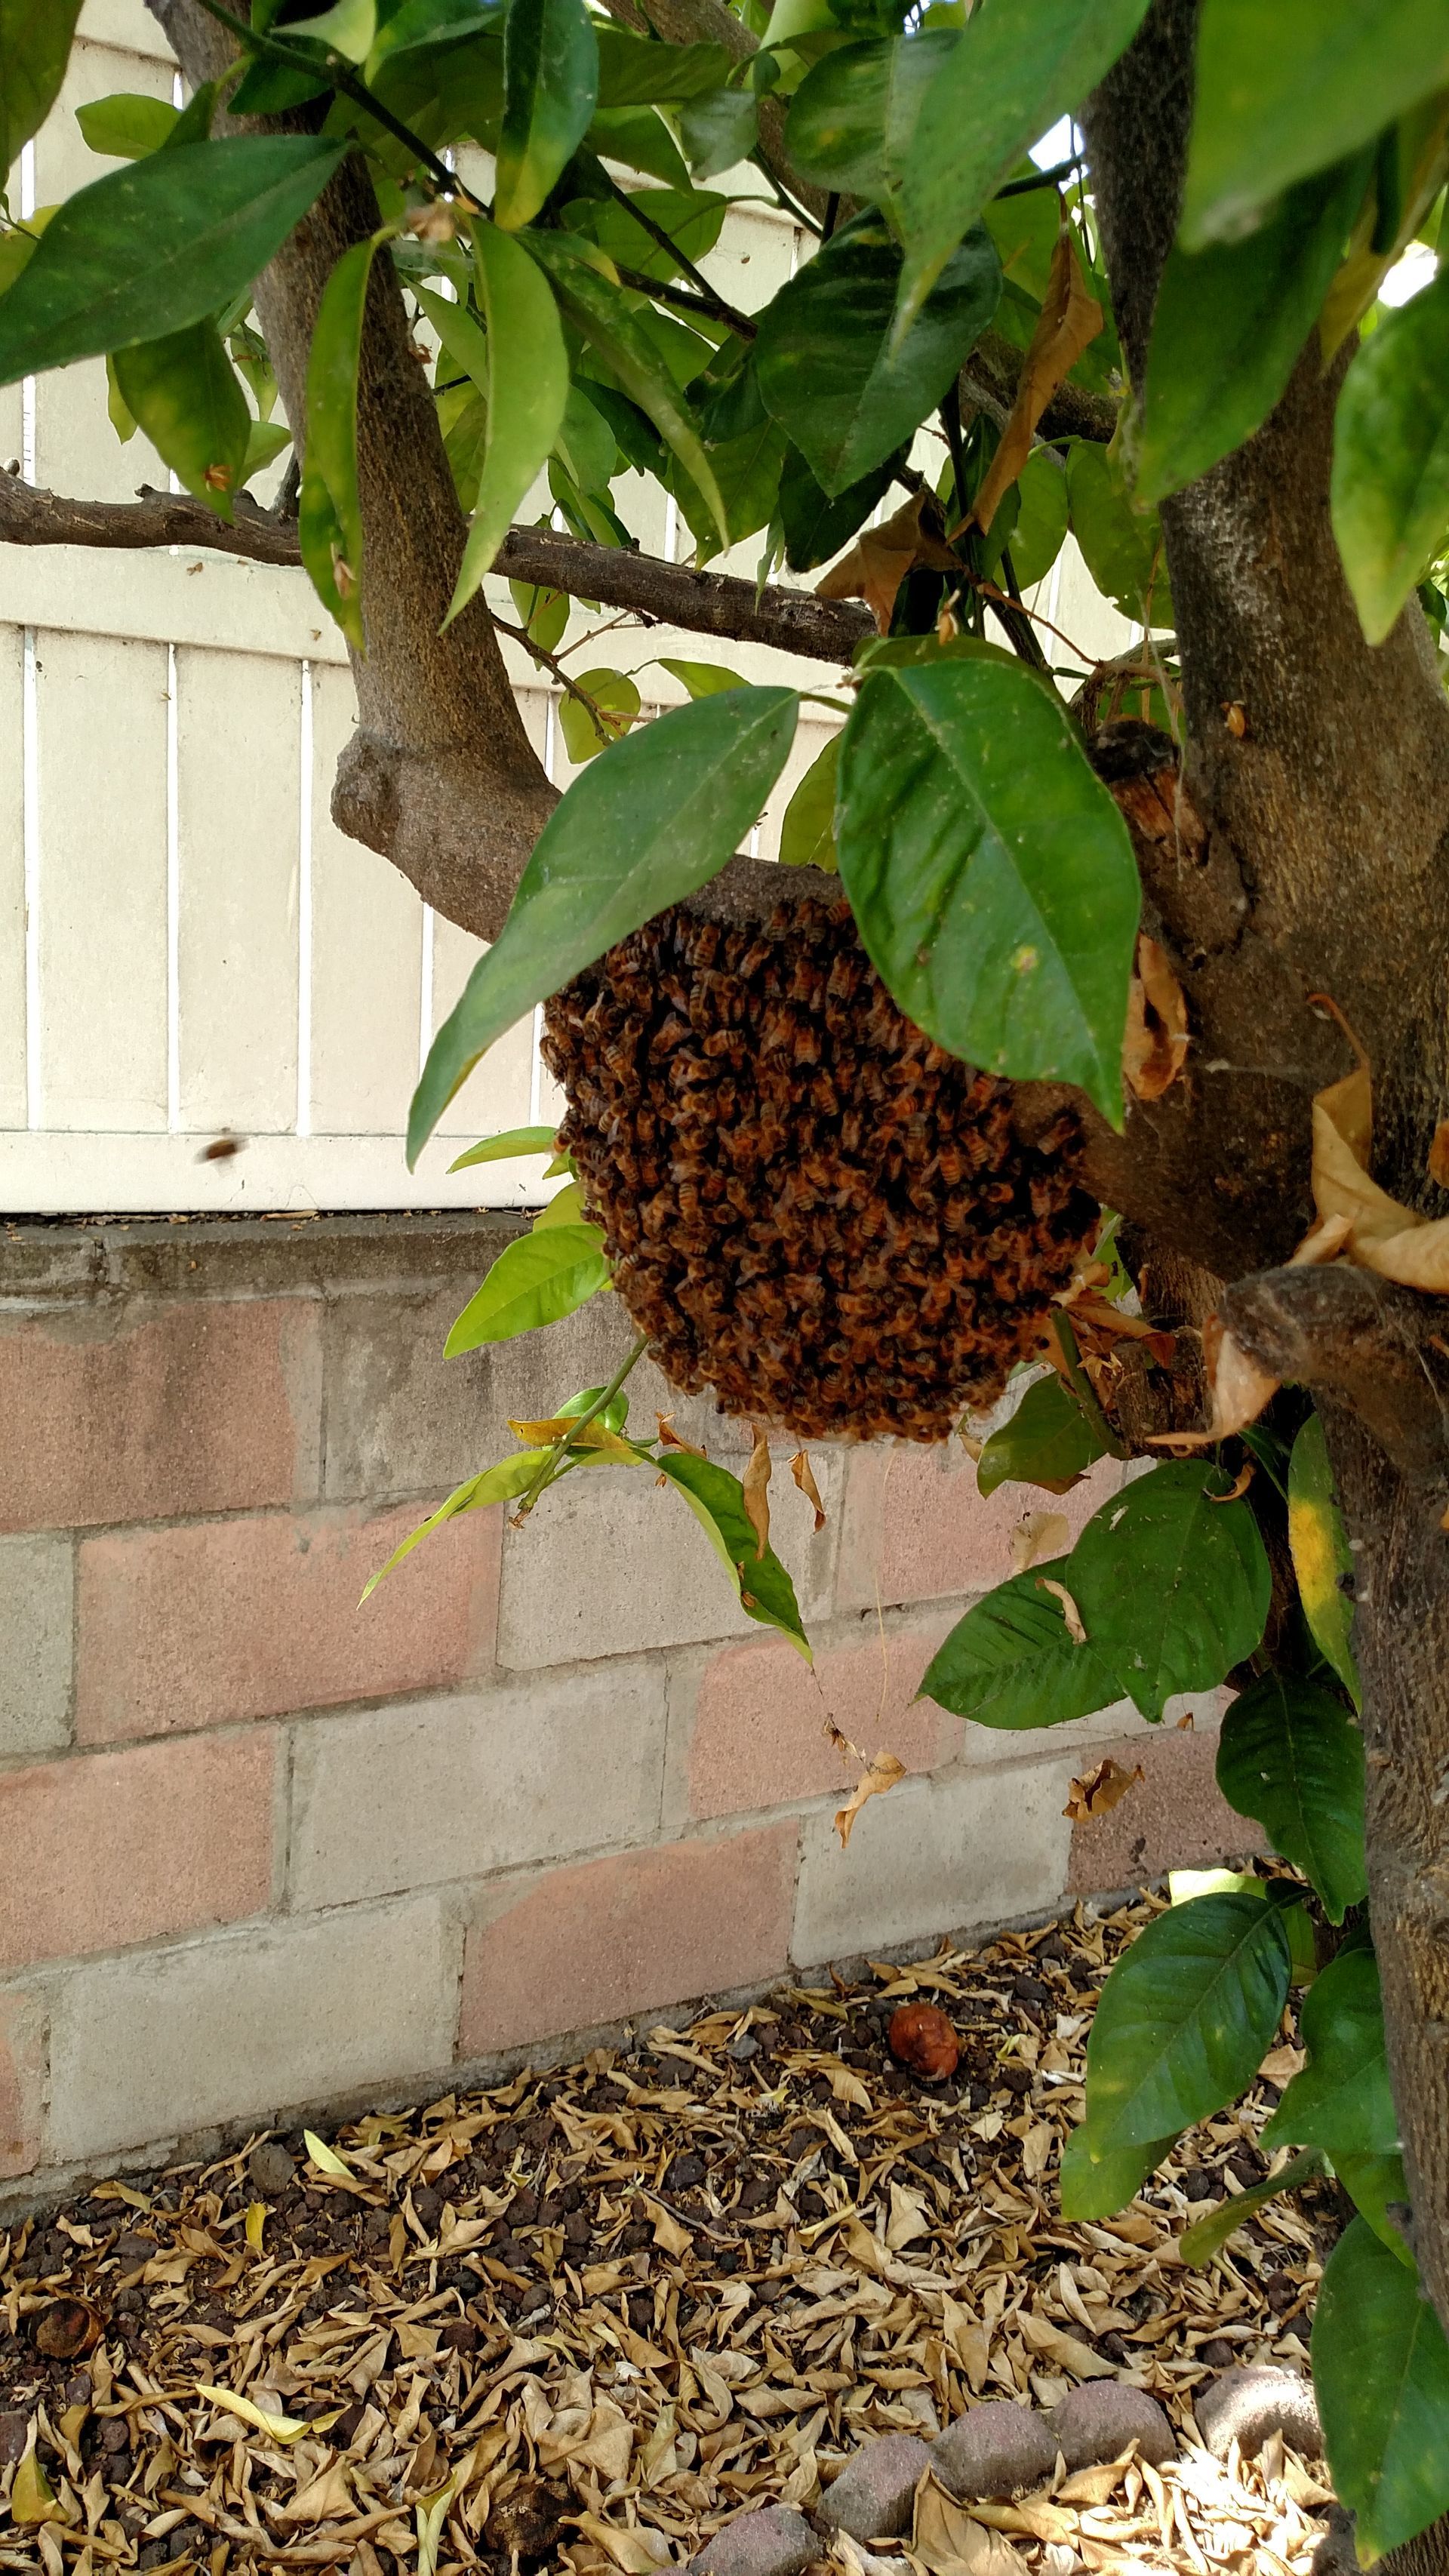 A large beehive is hanging from a tree branch.